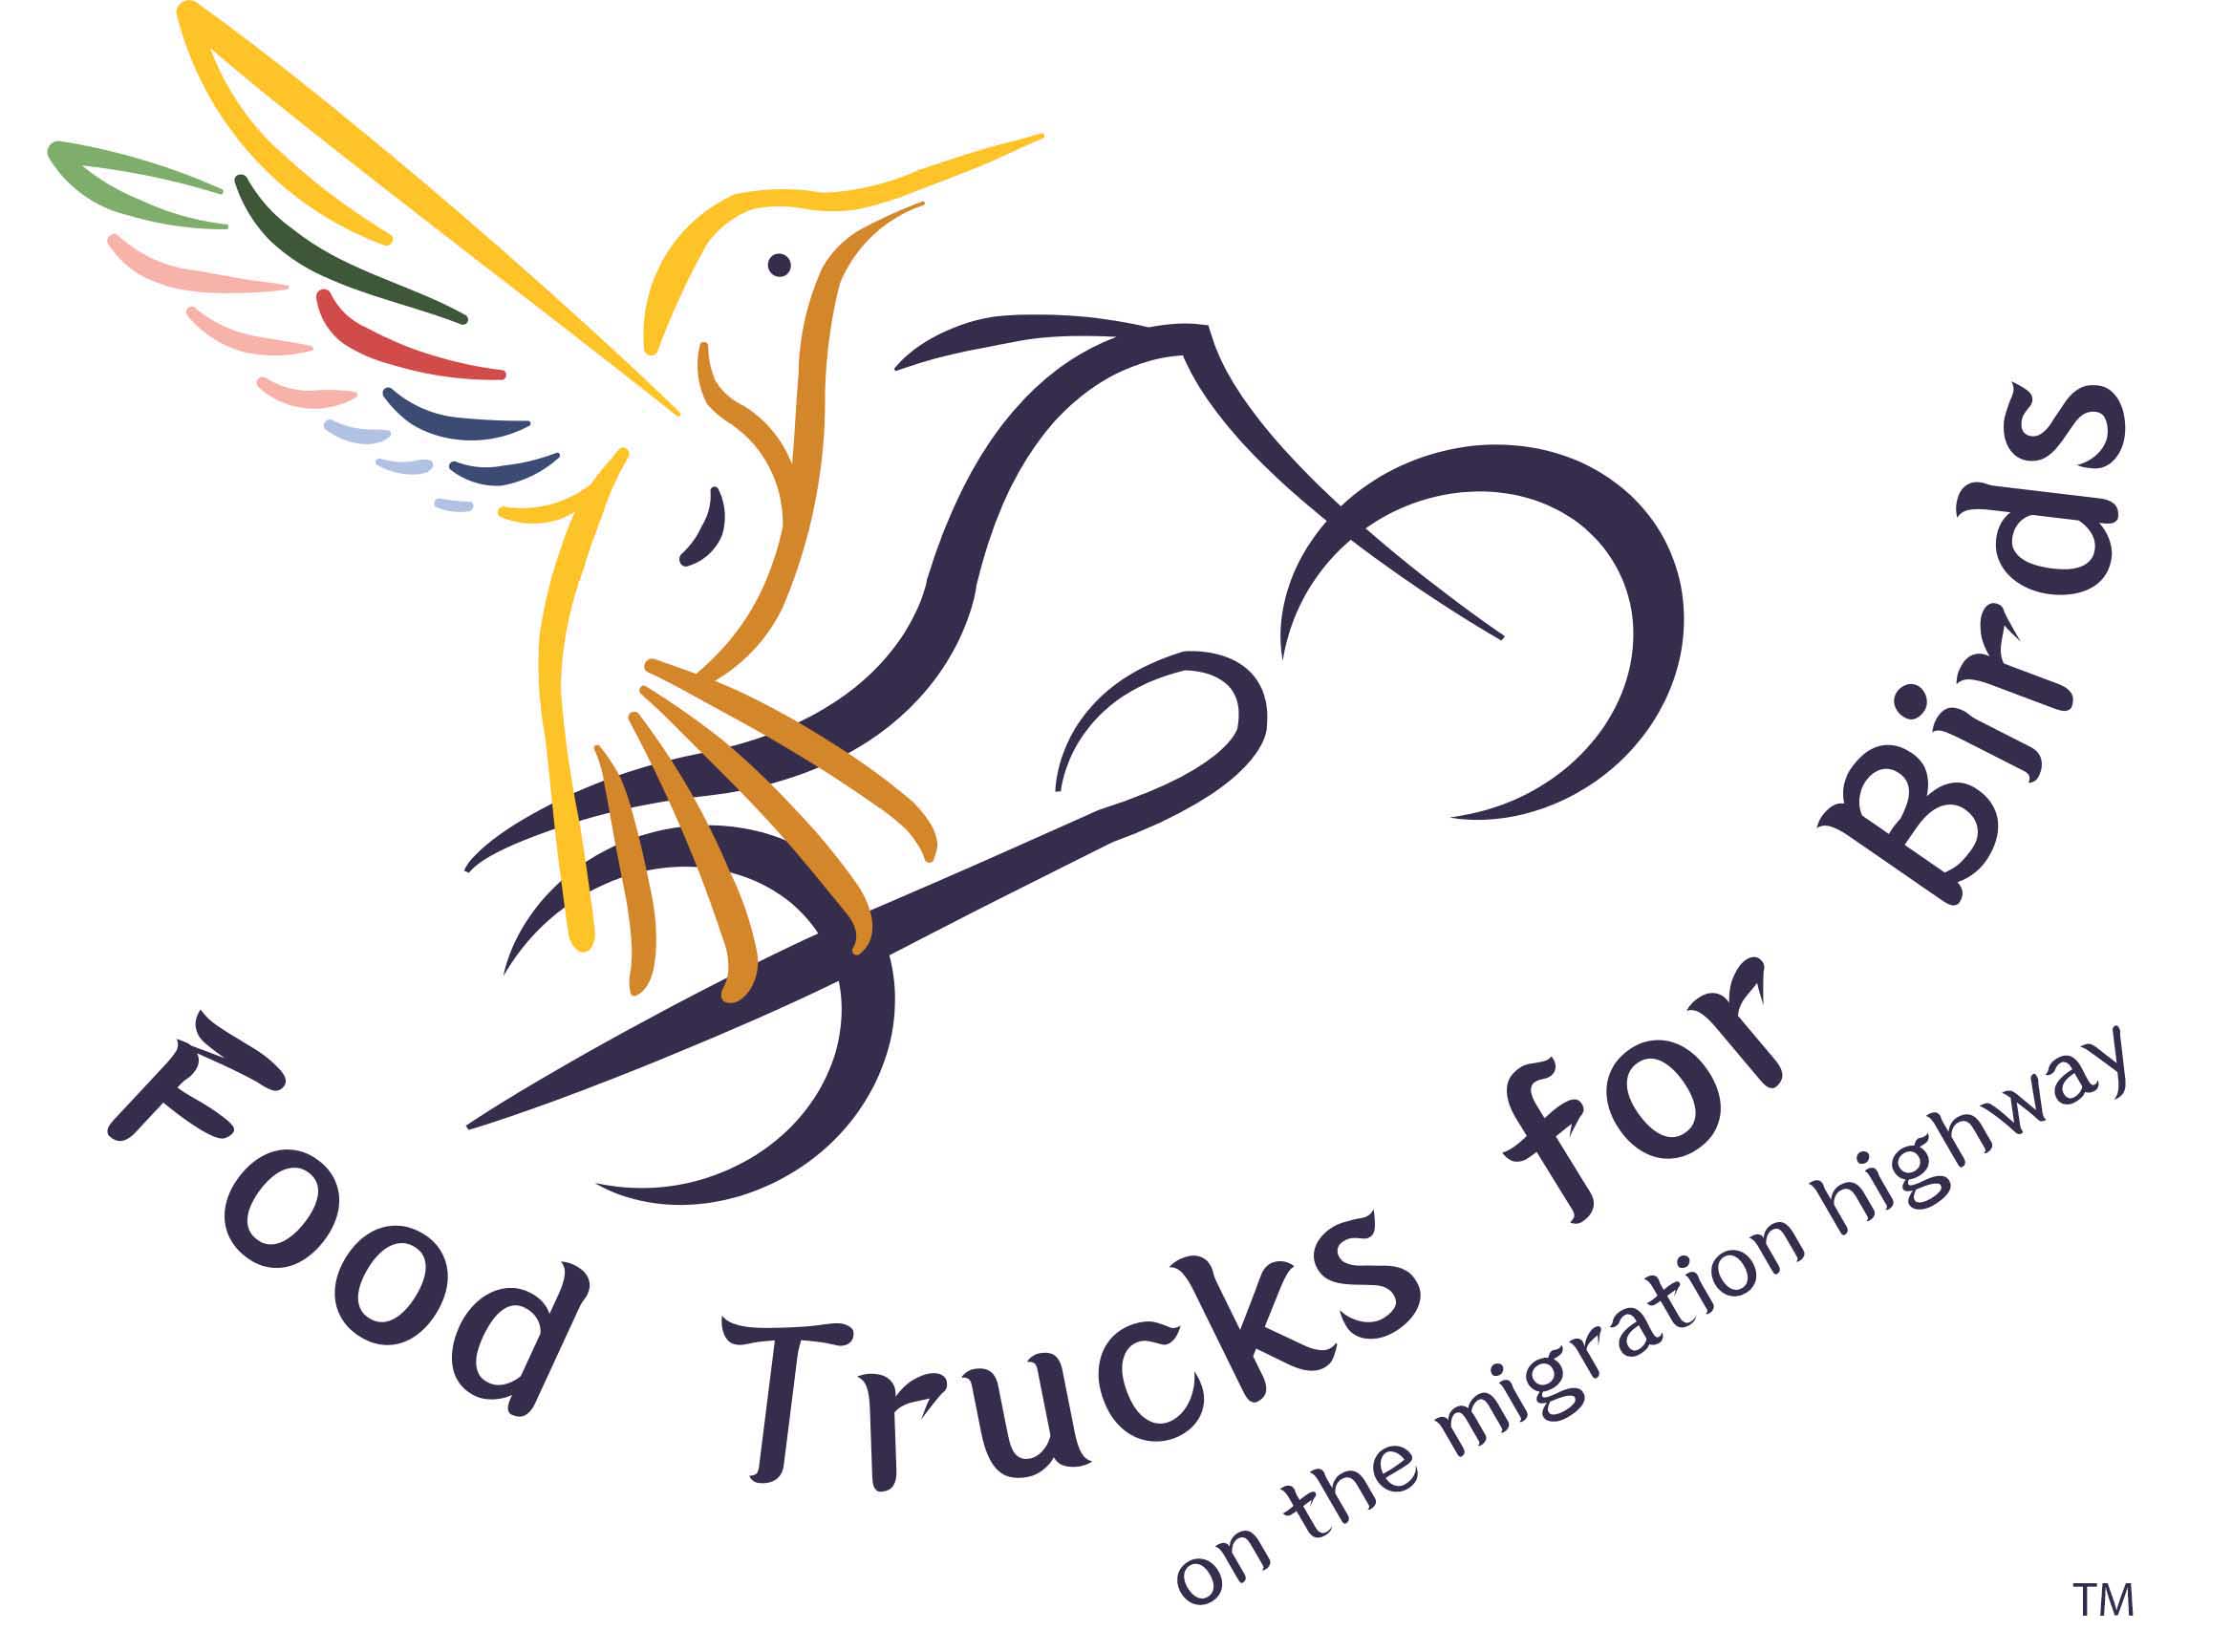 Food Trucks For Birds on the migration highway